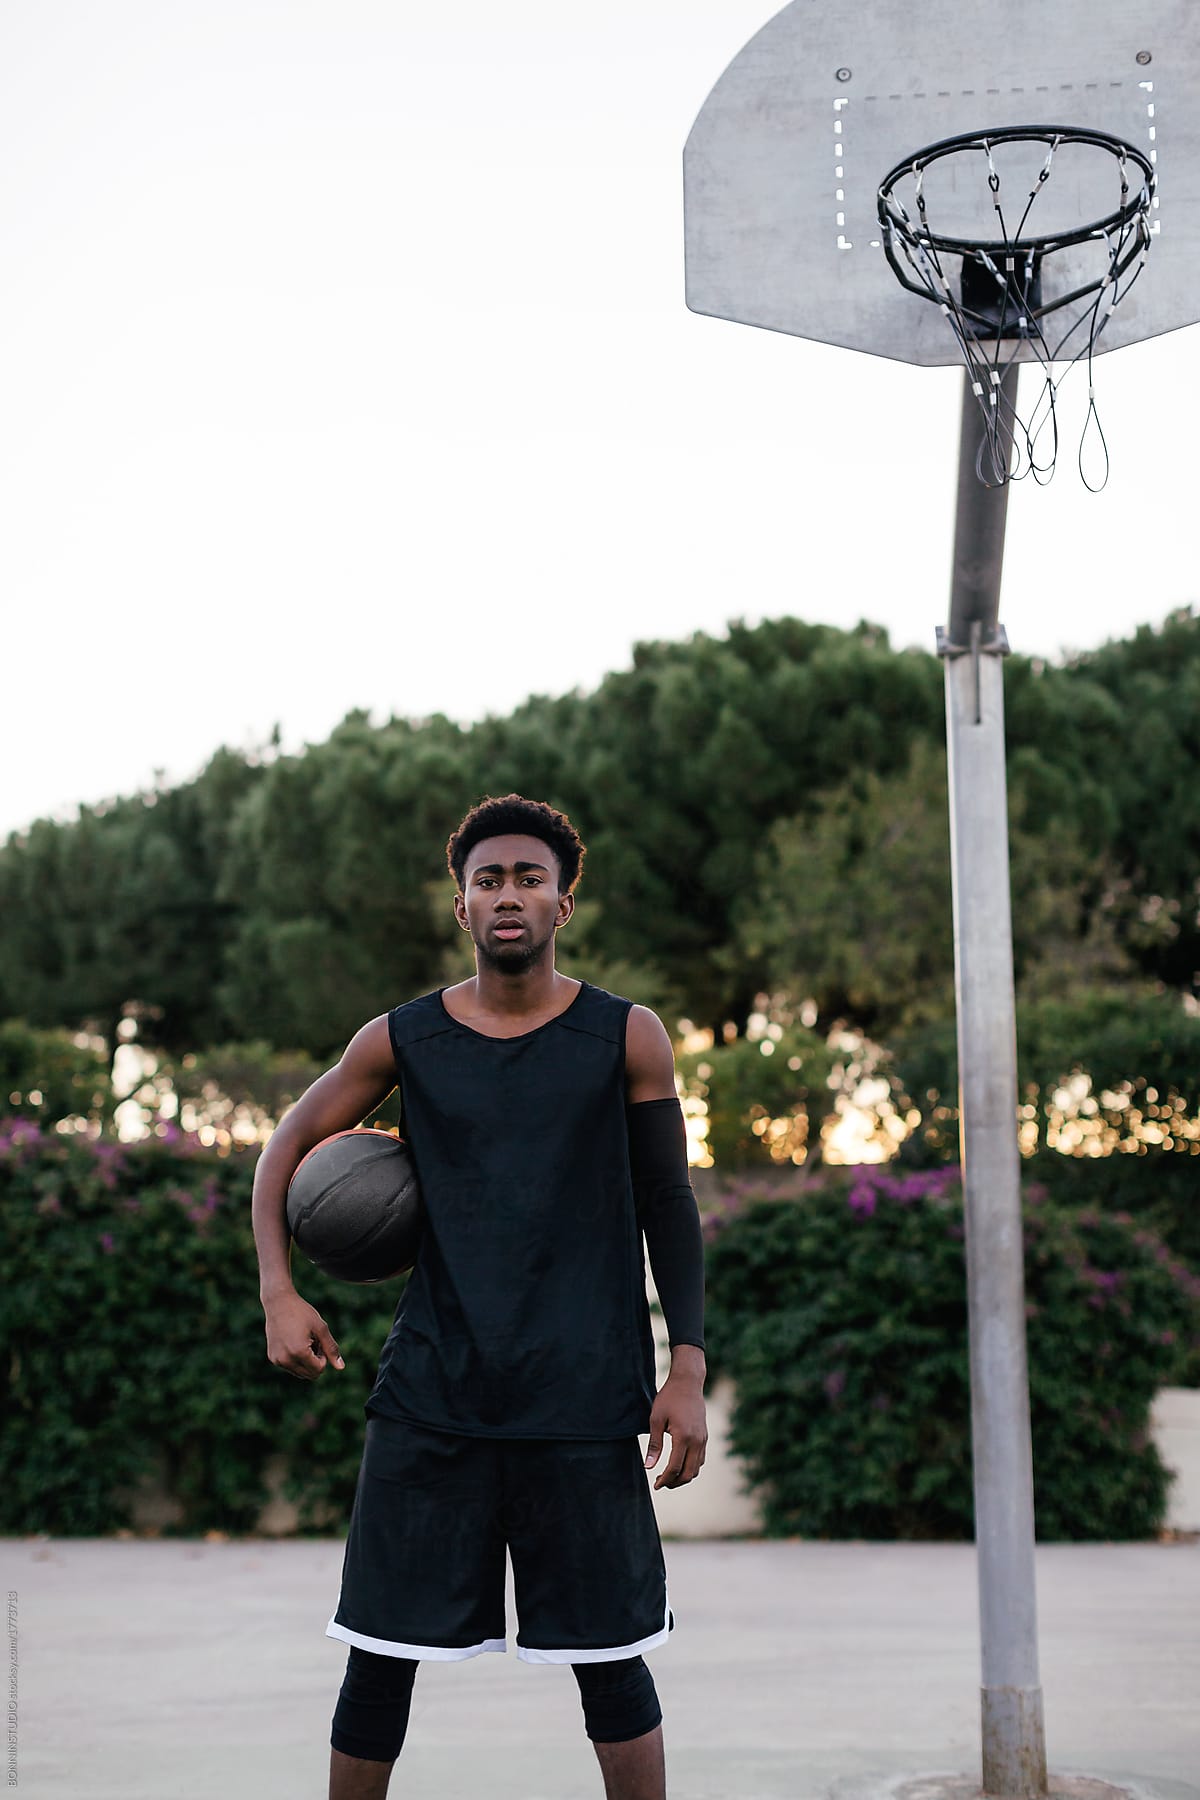 Portrait of a black man playing basketball on outdoor court.